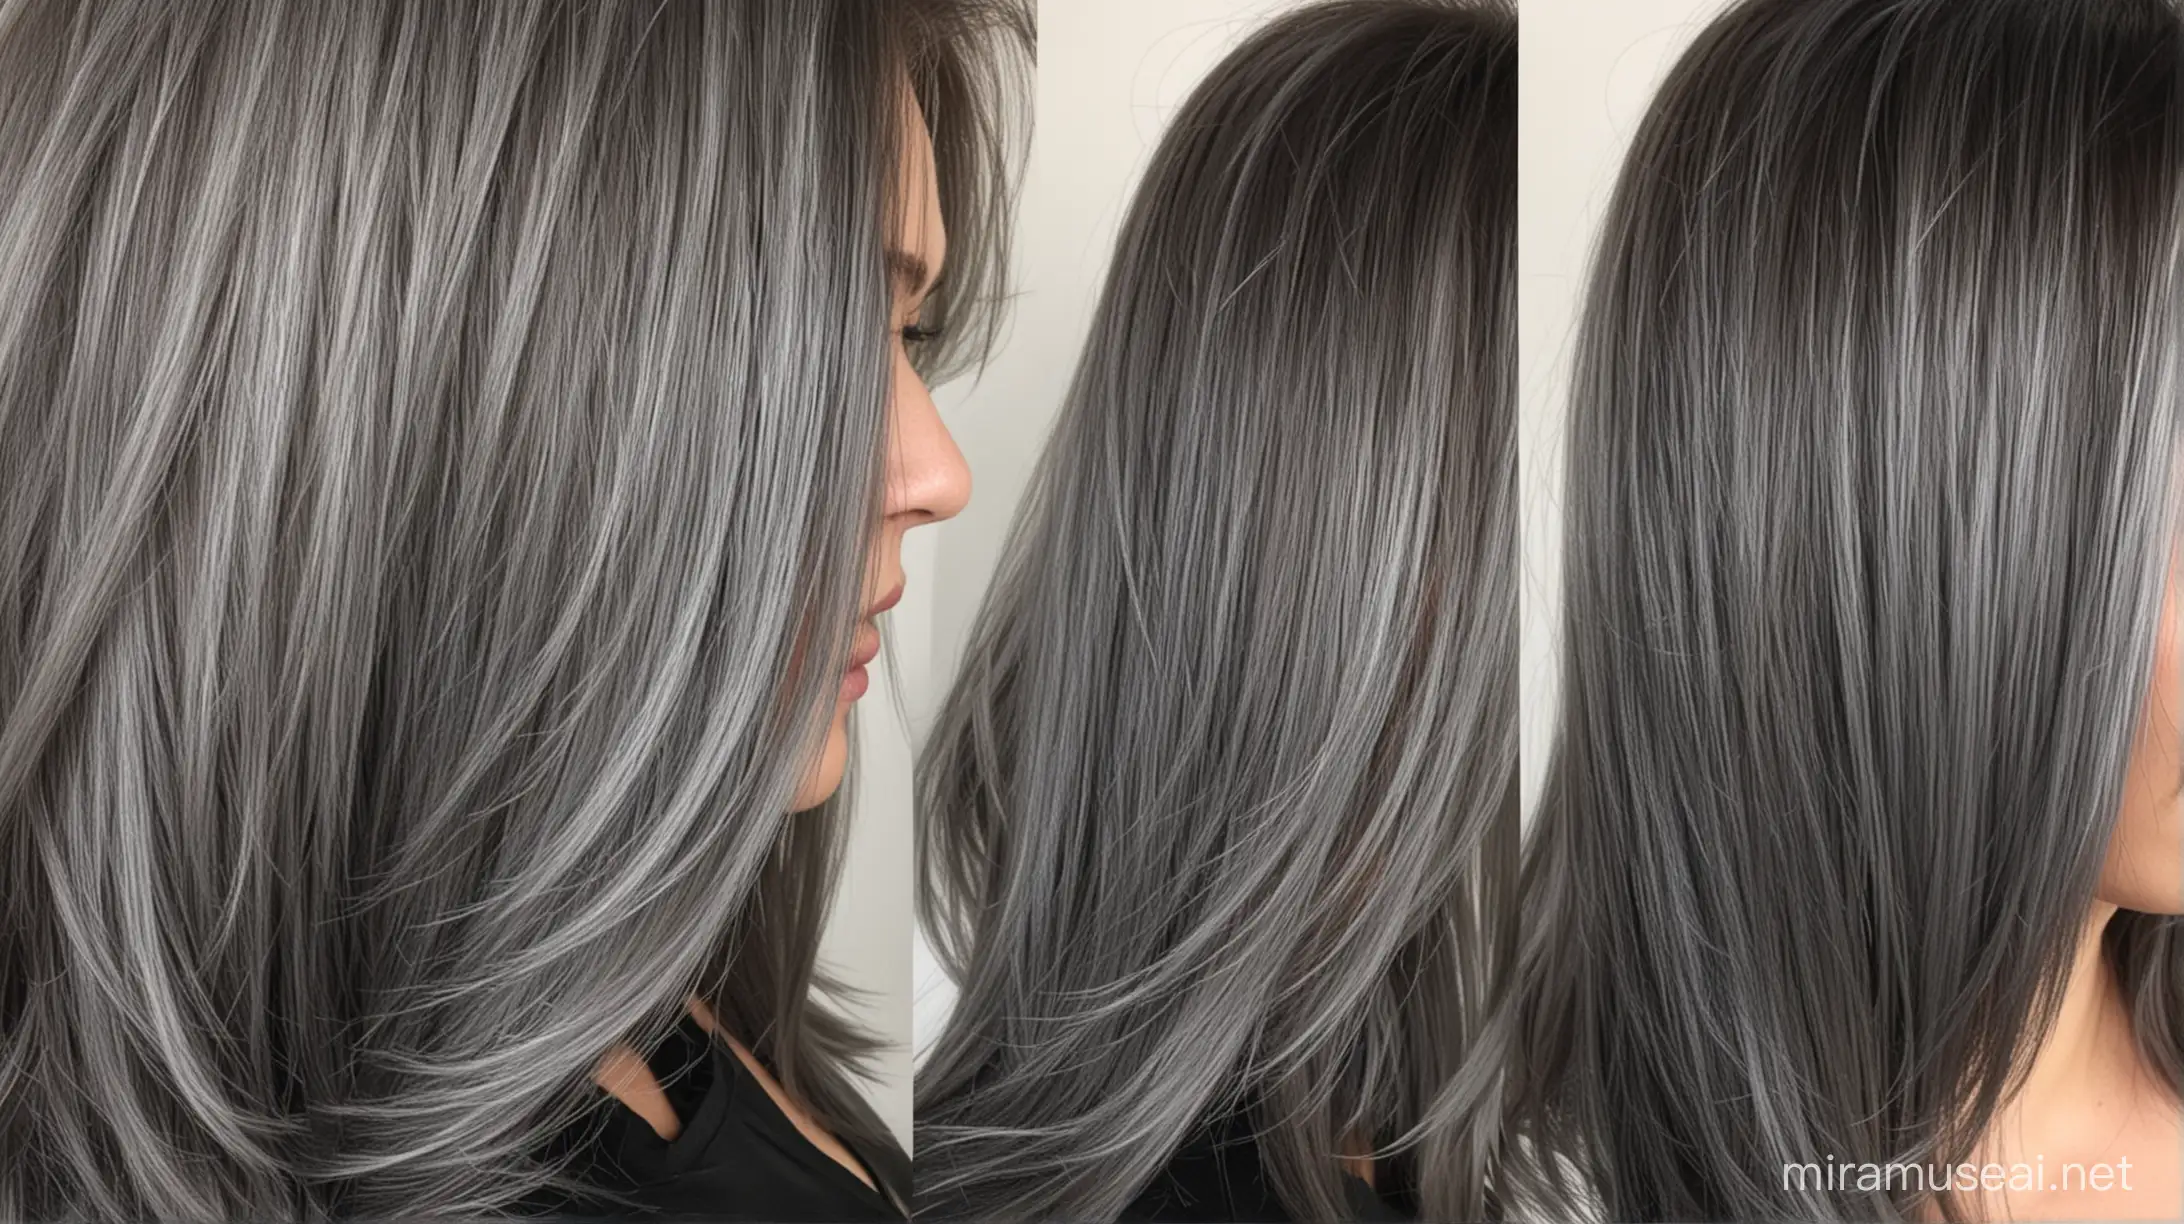 Choosing the Best Grey Coverage Hair Dye Expert Recommendations and Comparison